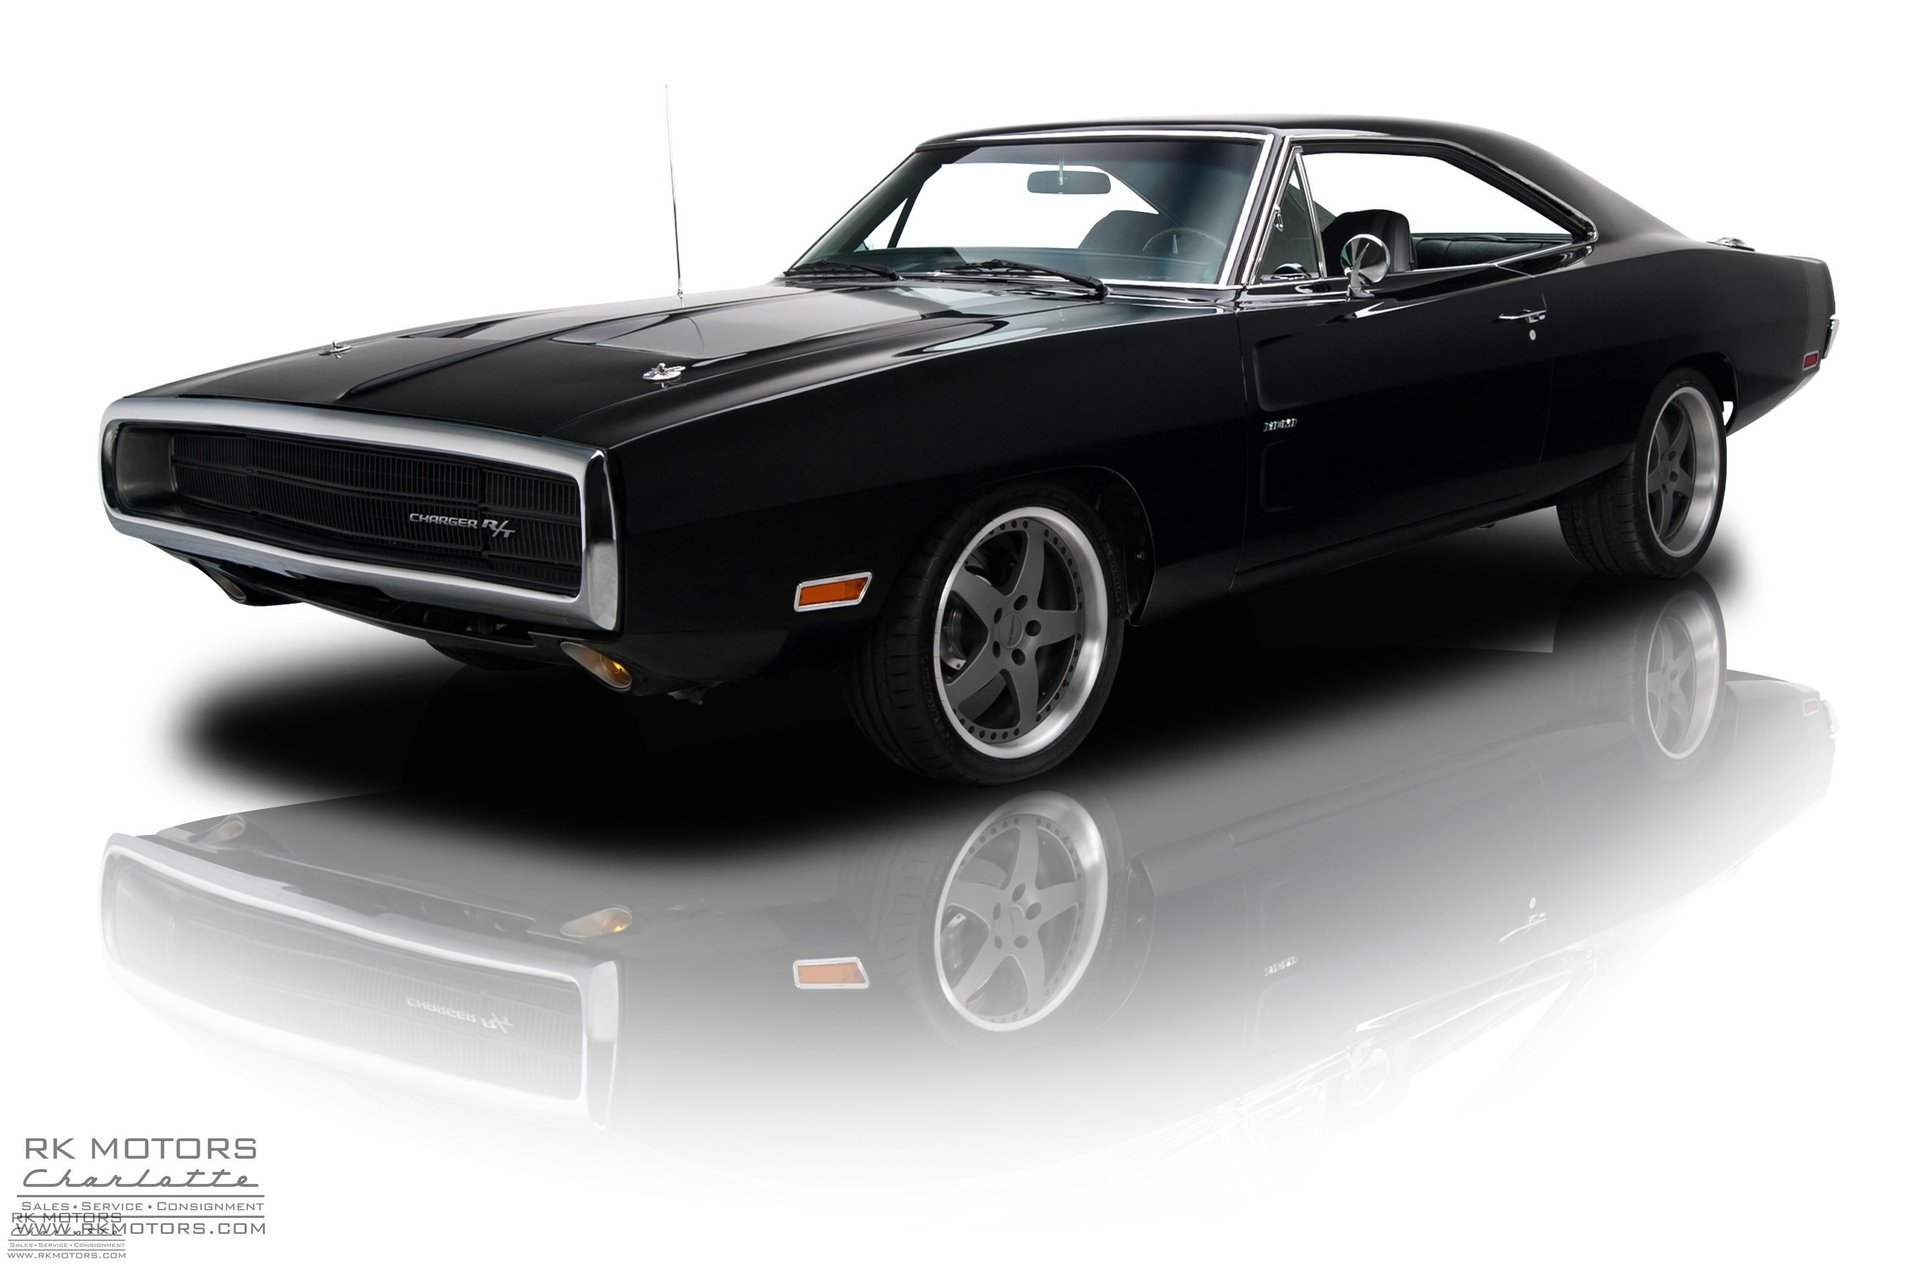 131004 1970 Dodge Charger RK Motors Classic Cars and Muscle Cars for Sale